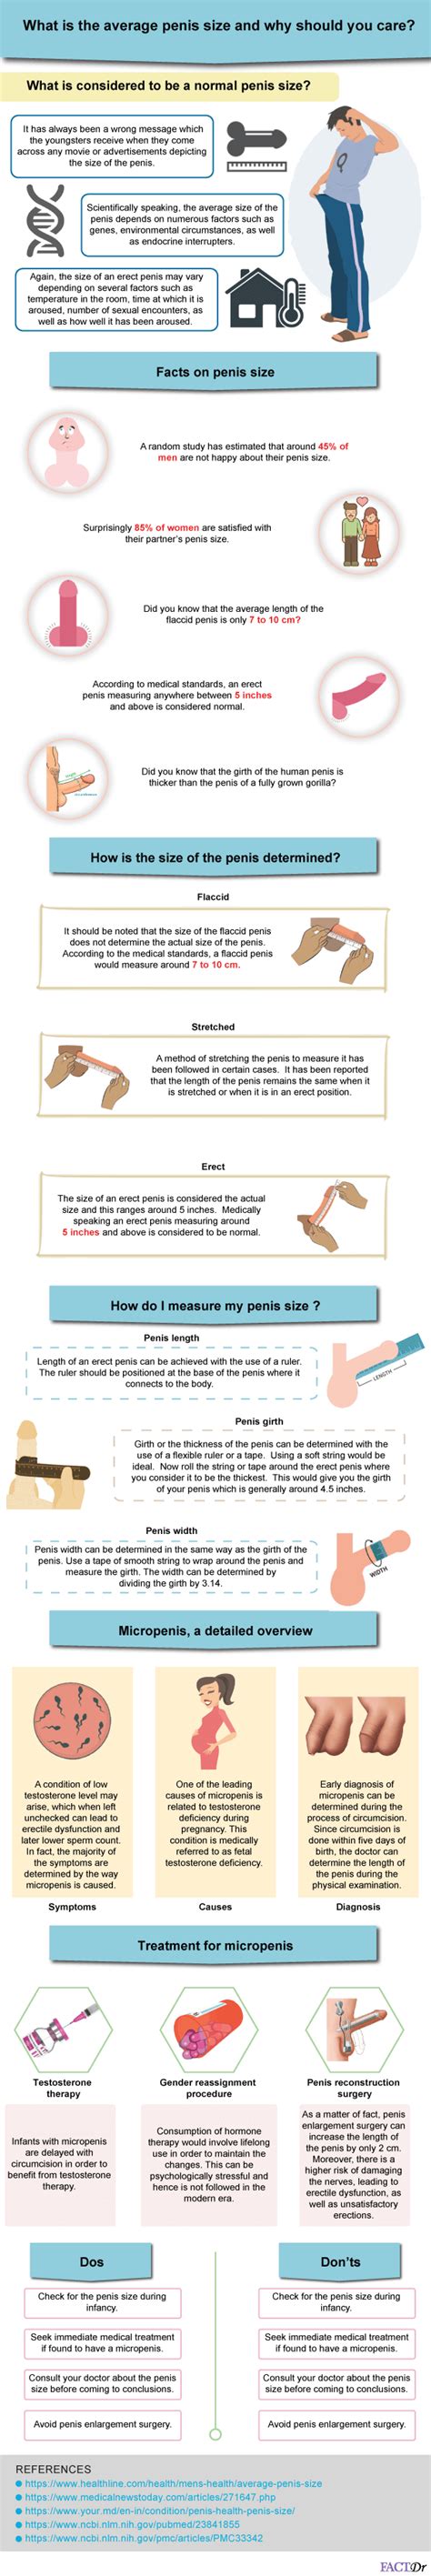 What Is The Average Penis Size And Why Should You Care Factdr